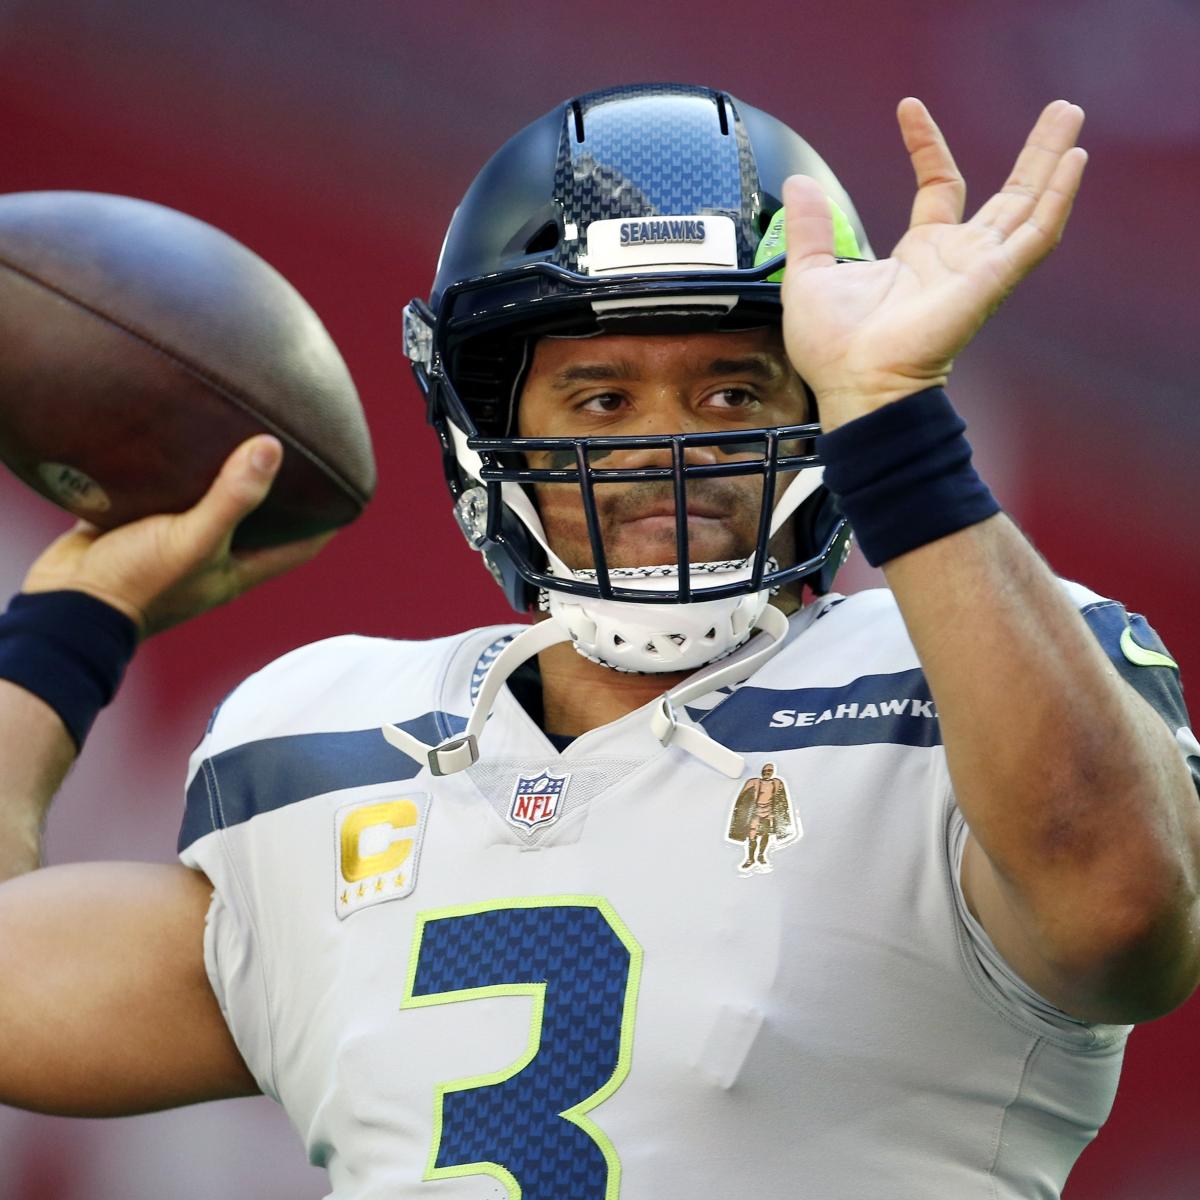 NFL Dominoes Left to Fall After Aaron Rodgers, Russell Wilson Deals thumbnail